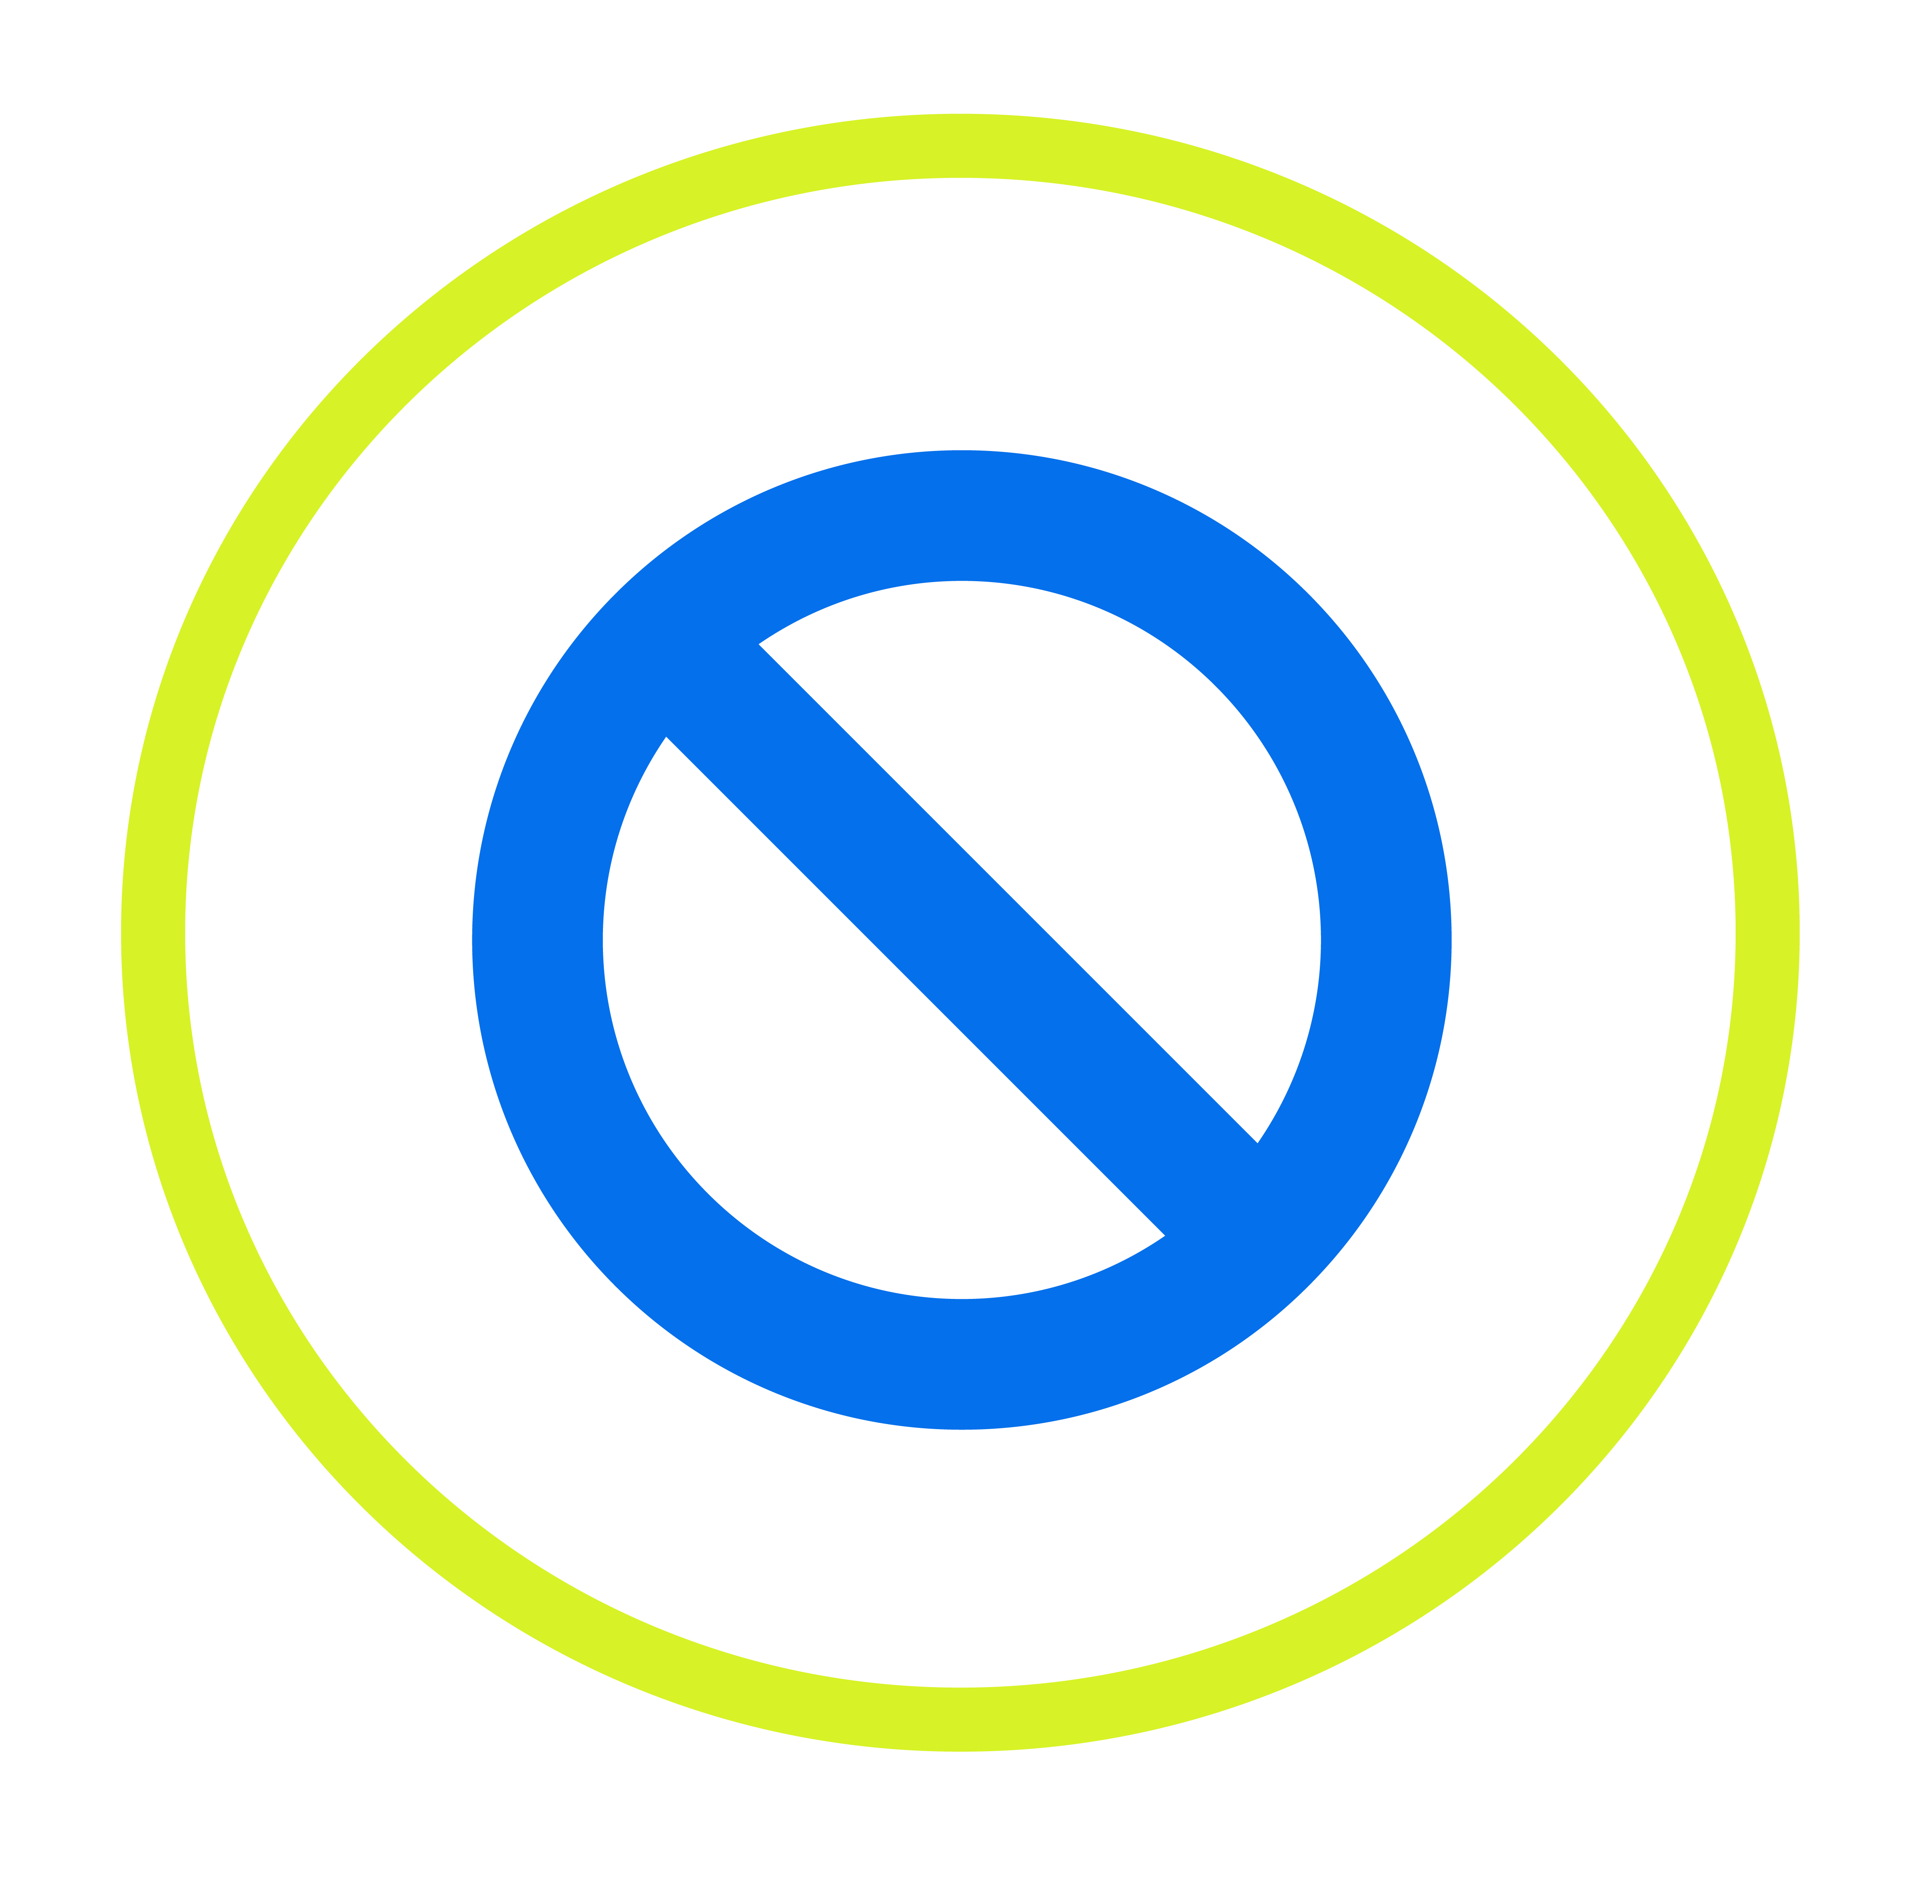 icon of a circle with a line through it for no entry